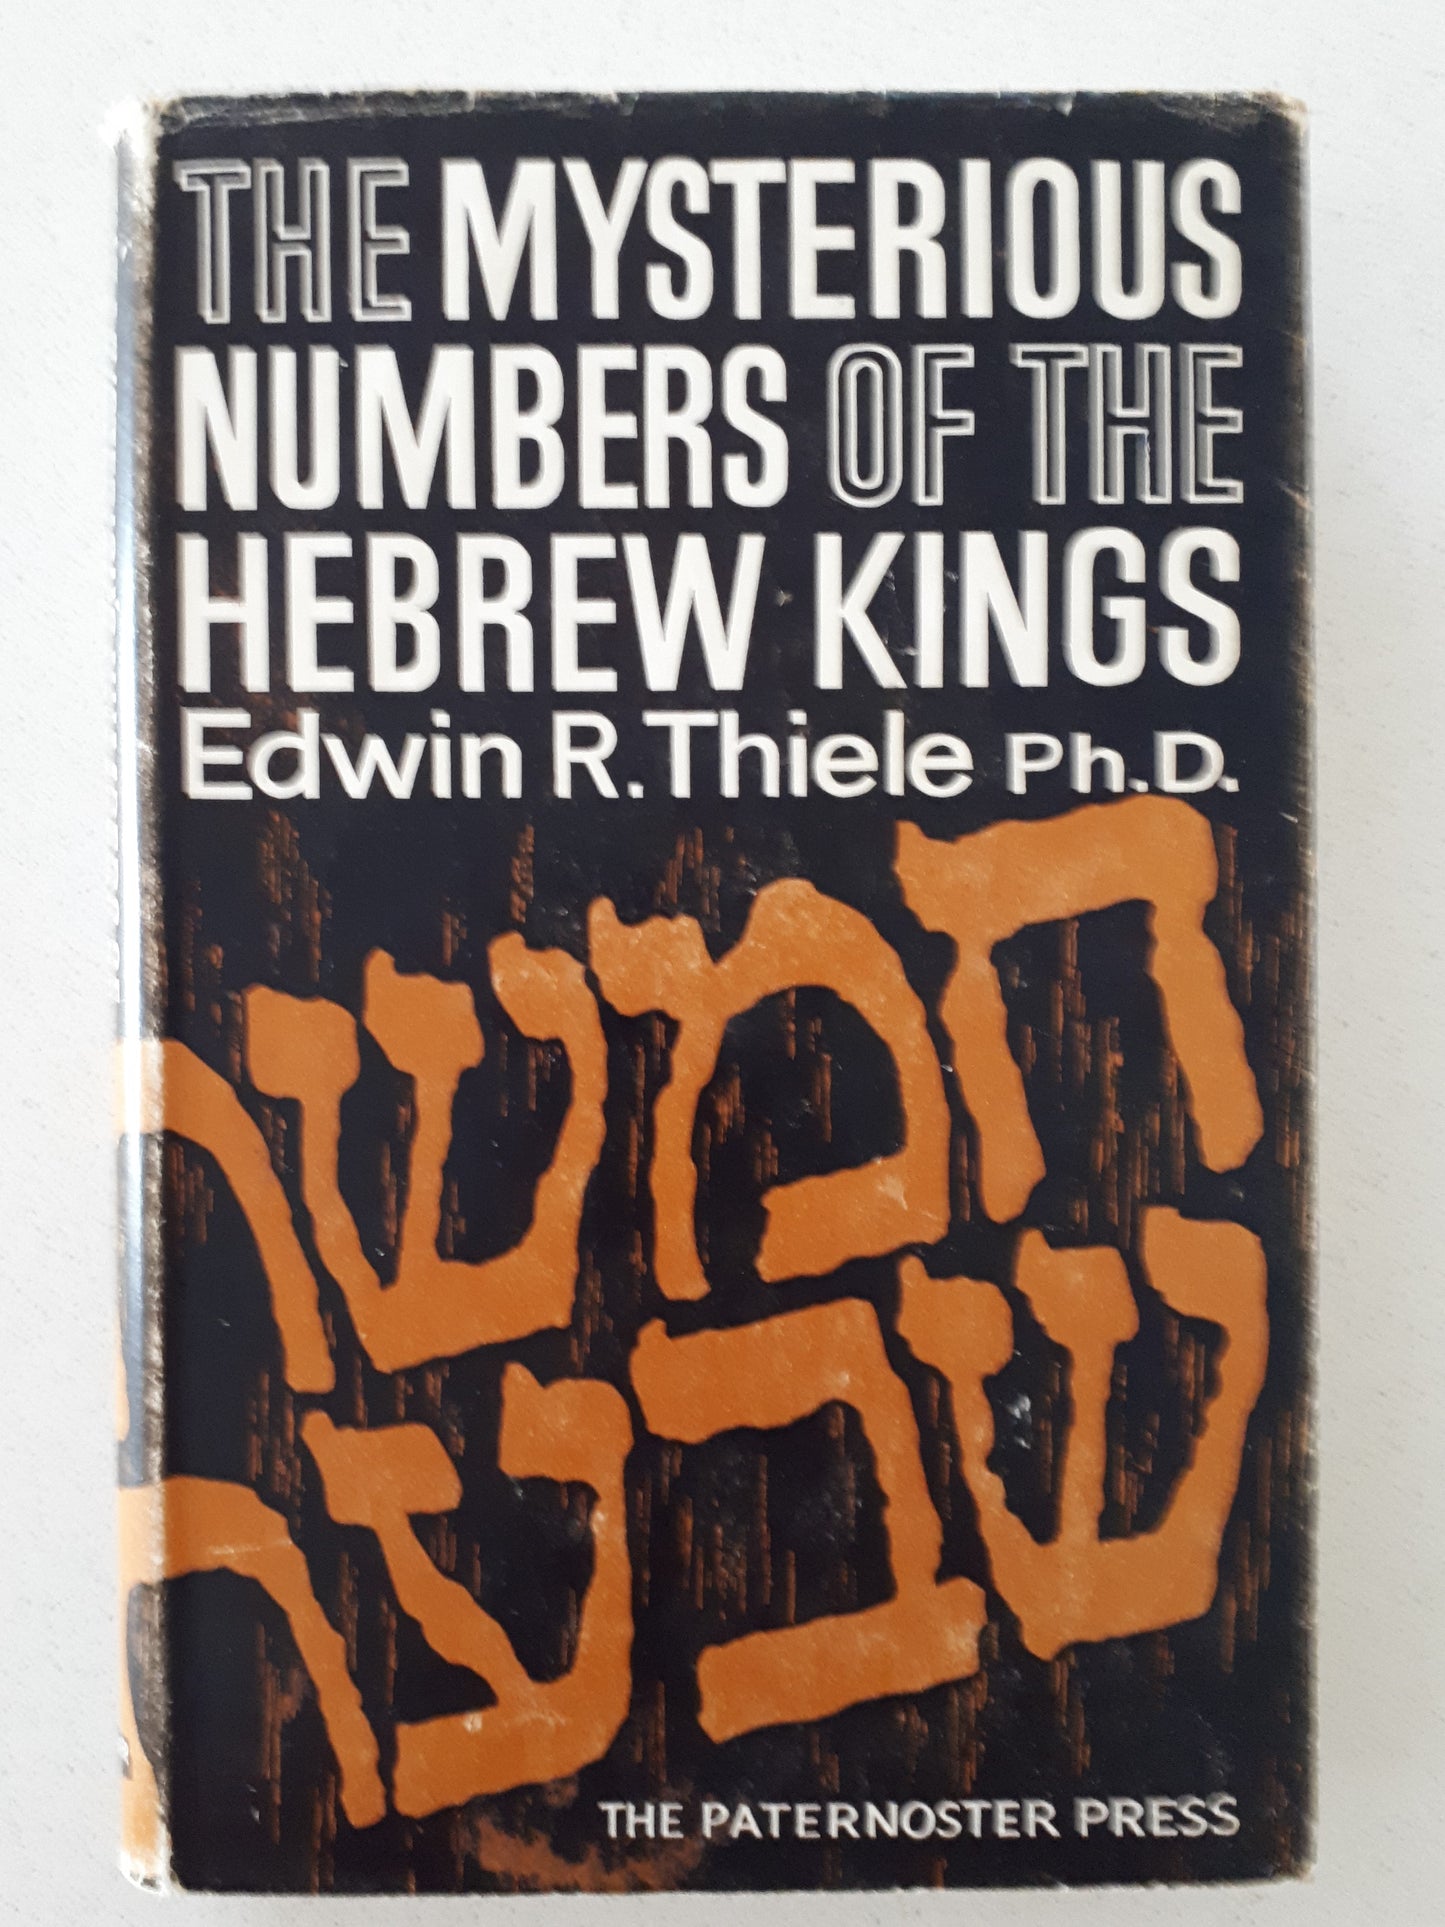 The Mysterious Numbers of the Hebrew Kings  A Reconstruction of the Chronology of the Kingdoms of Israel and Judah  by Edwin R. Thiele